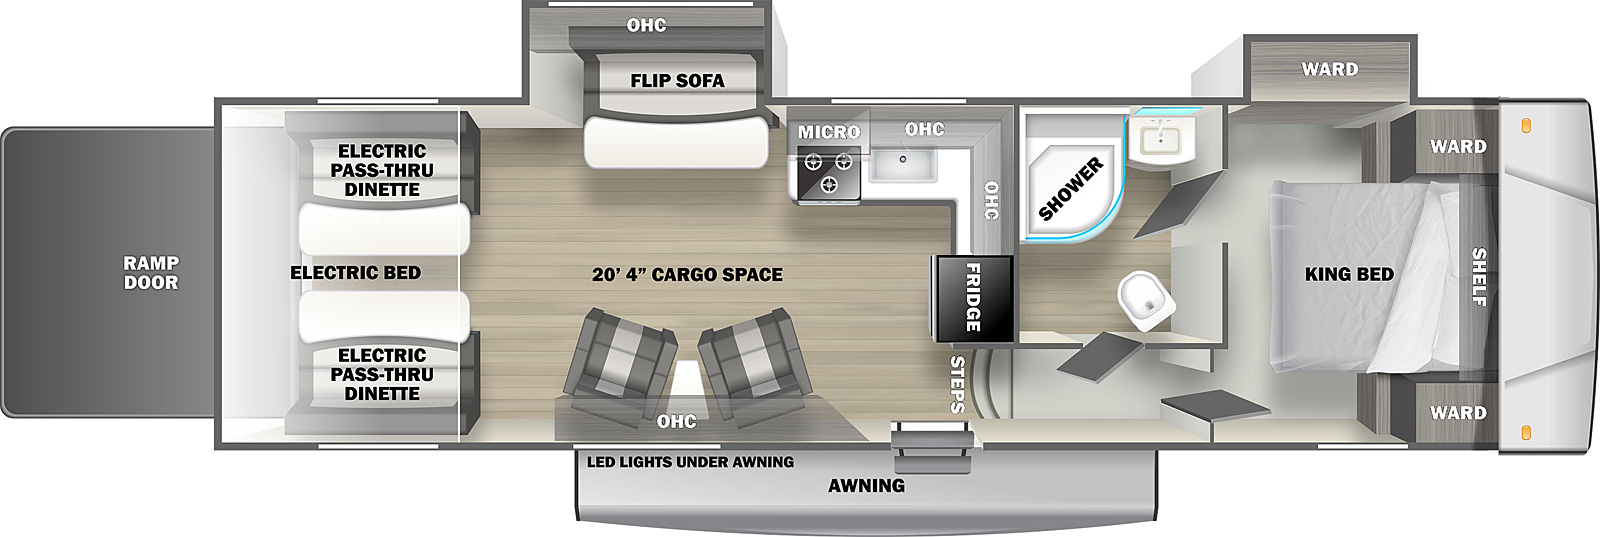 The Stealth SA3320G is a toy hauler fifth wheel with one entry door, a rear ramp door, two slides on the off-door side, and 18' awning on the exterior. Inside, a walkaround king bed is located in the front of the unit, with wardrobe cabinets on either side and cabinets overhead. There is a wardrobe and vanity slide located on the off-door bedroom wall. The bedrdoom has two doors, one into the bathroom and one into a short hallway that descends two steps and opens to the main living area. The bathroom contains a sink, commode, and glass radius shower. The refrigerator is located on the outside bathroom wall, facing the rear of the unit. There is an L-shaped countertop next to the refrigerator, with a sink, cooktop and oven, plus cabinets and a microwave mounted overhead. Additional overhead cabinets are mounted on the door side, with a pair of upholstered chairs and small table located underneath. Across from the chairs on the off-door side is a sofa slide containing a flip sofa and half dinette table. In the rear of the unit are two flip sofa benches, one on either side, with a split dinette table between them. These convert to a standard electric bed. This trailer provides 20' 4" of interior cargo space.